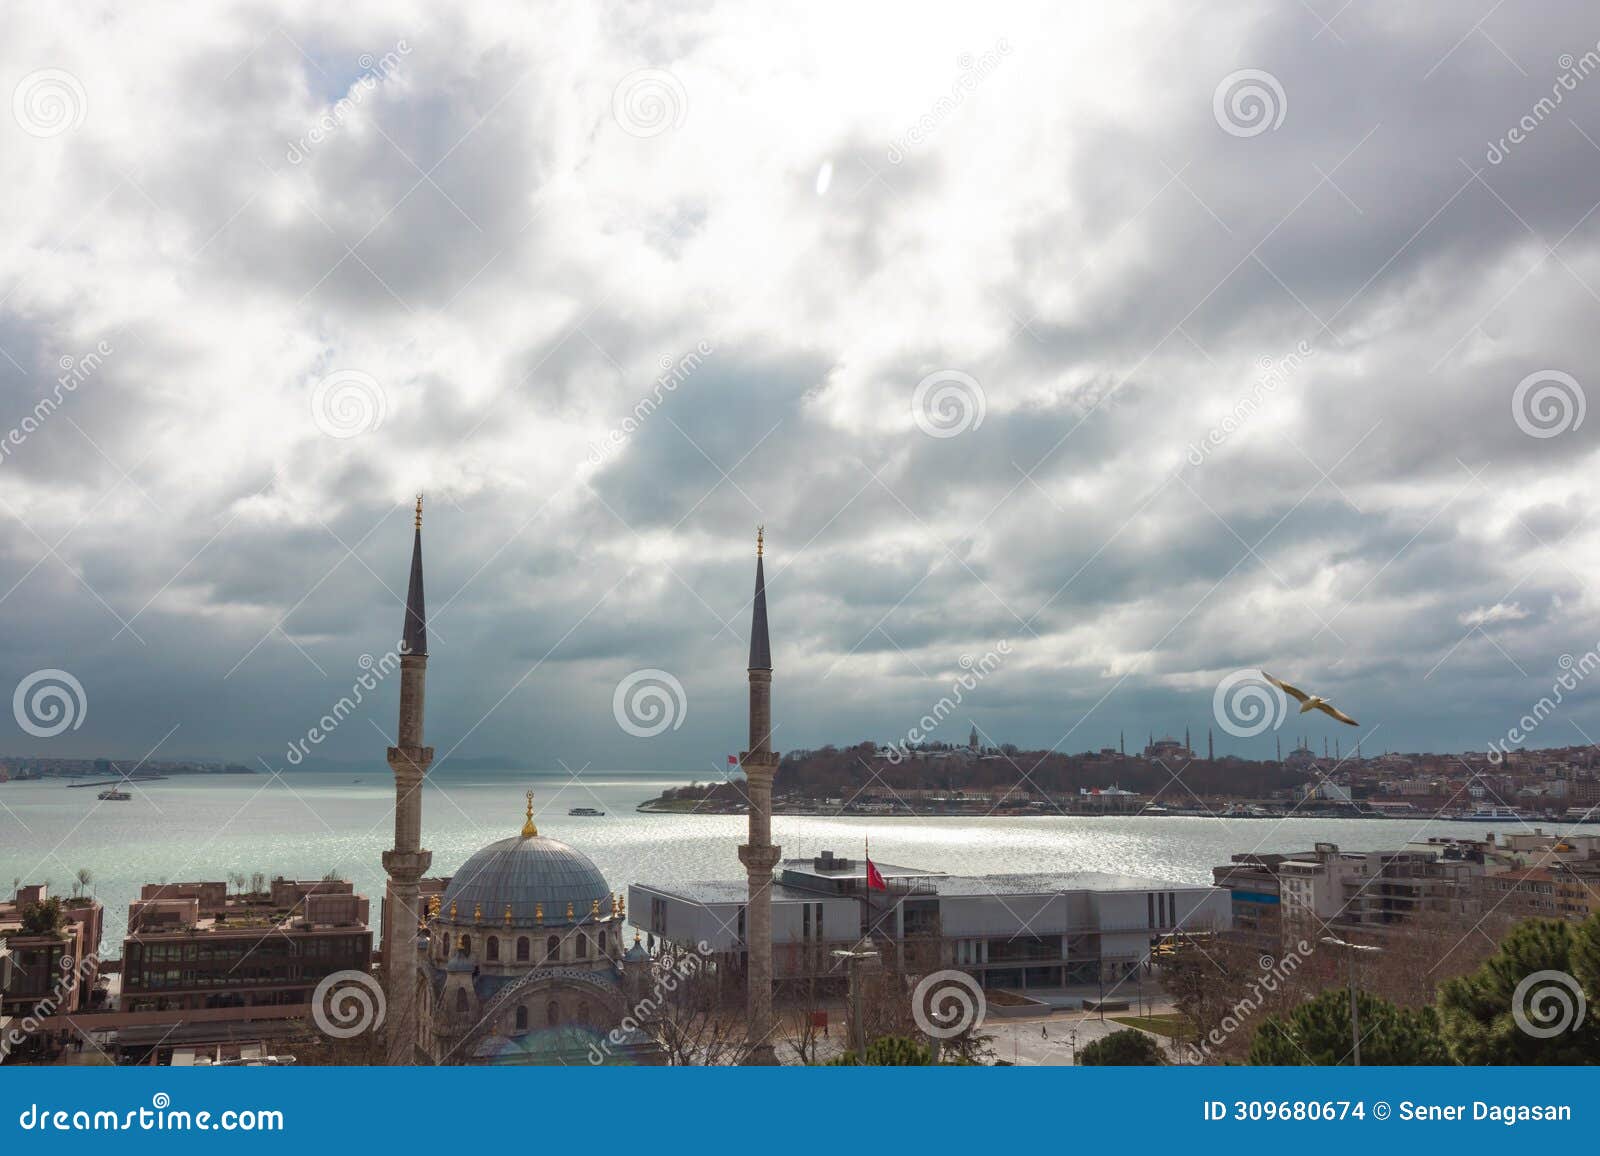 istanbul view from cihangir district. nusretiye mosque and galataport